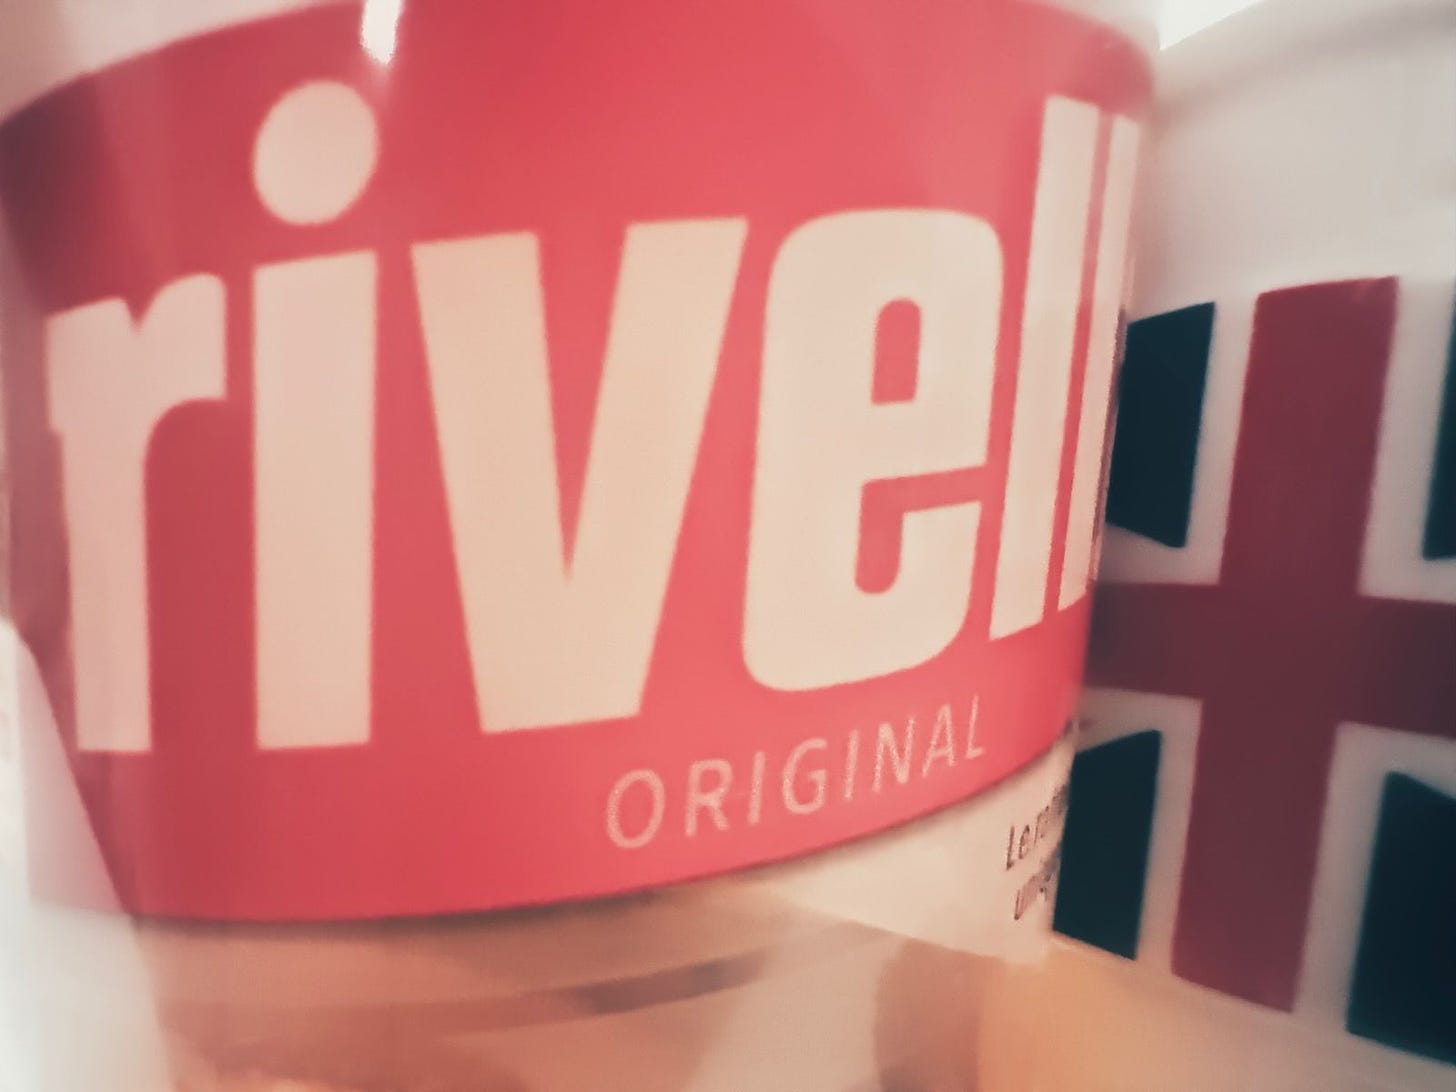 We taste traditional Swiss food and drink so you don't have to: Rivella